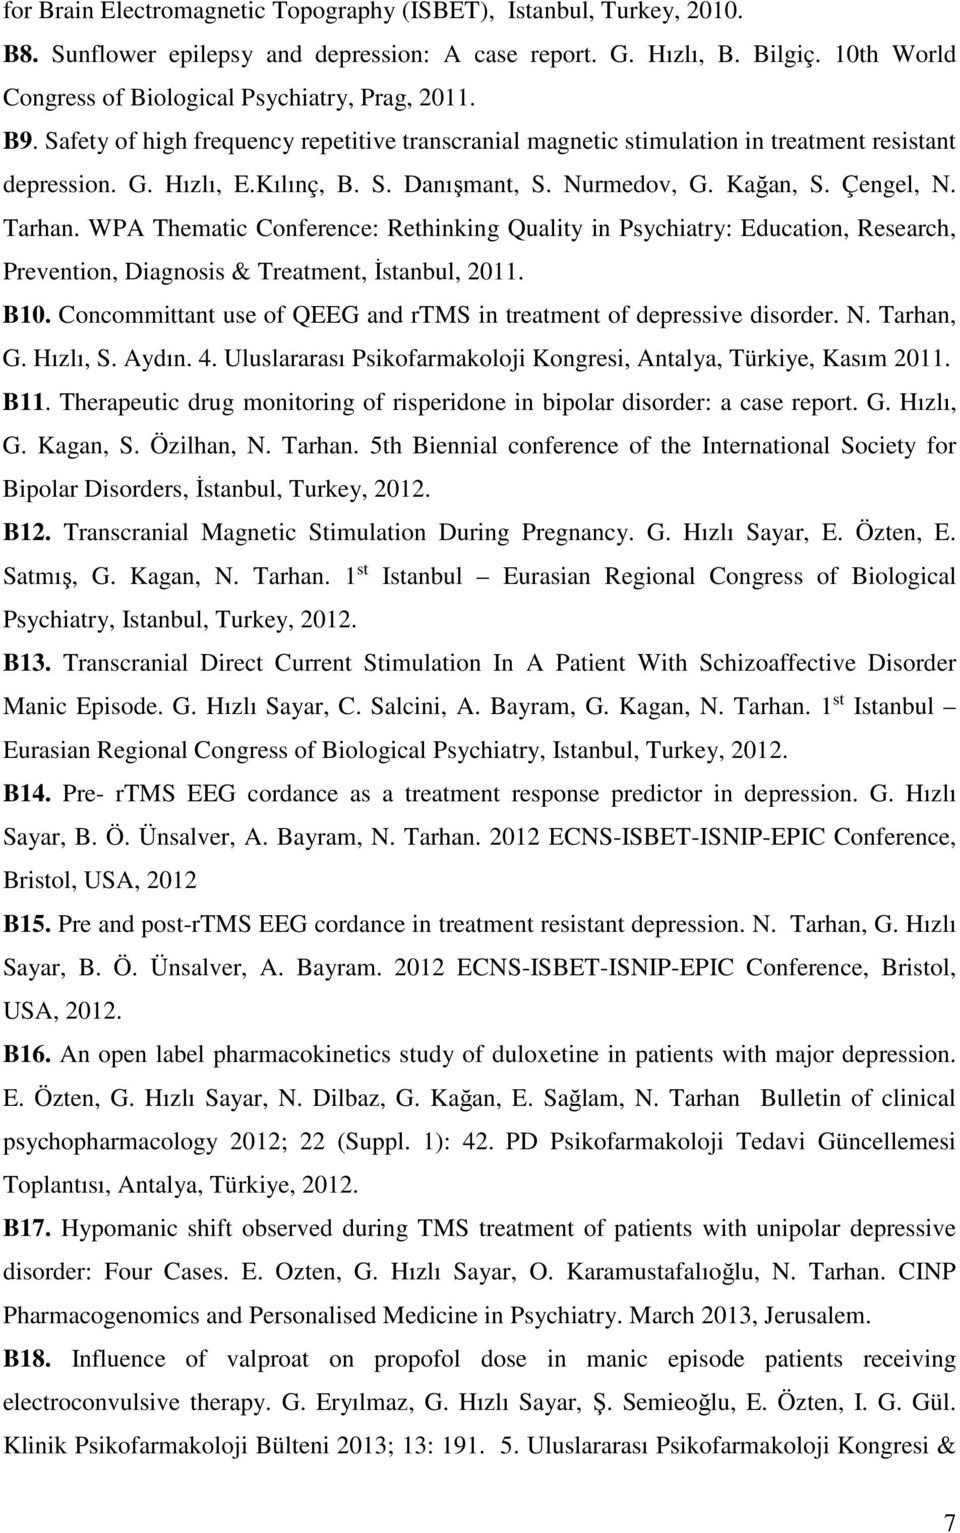 Nurmedov, G. Kağan, S. Çengel, N. Tarhan. WPA Thematic Conference: Rethinking Quality in Psychiatry: Education, Research, Prevention, Diagnosis & Treatment, İstanbul, 2011. B10.